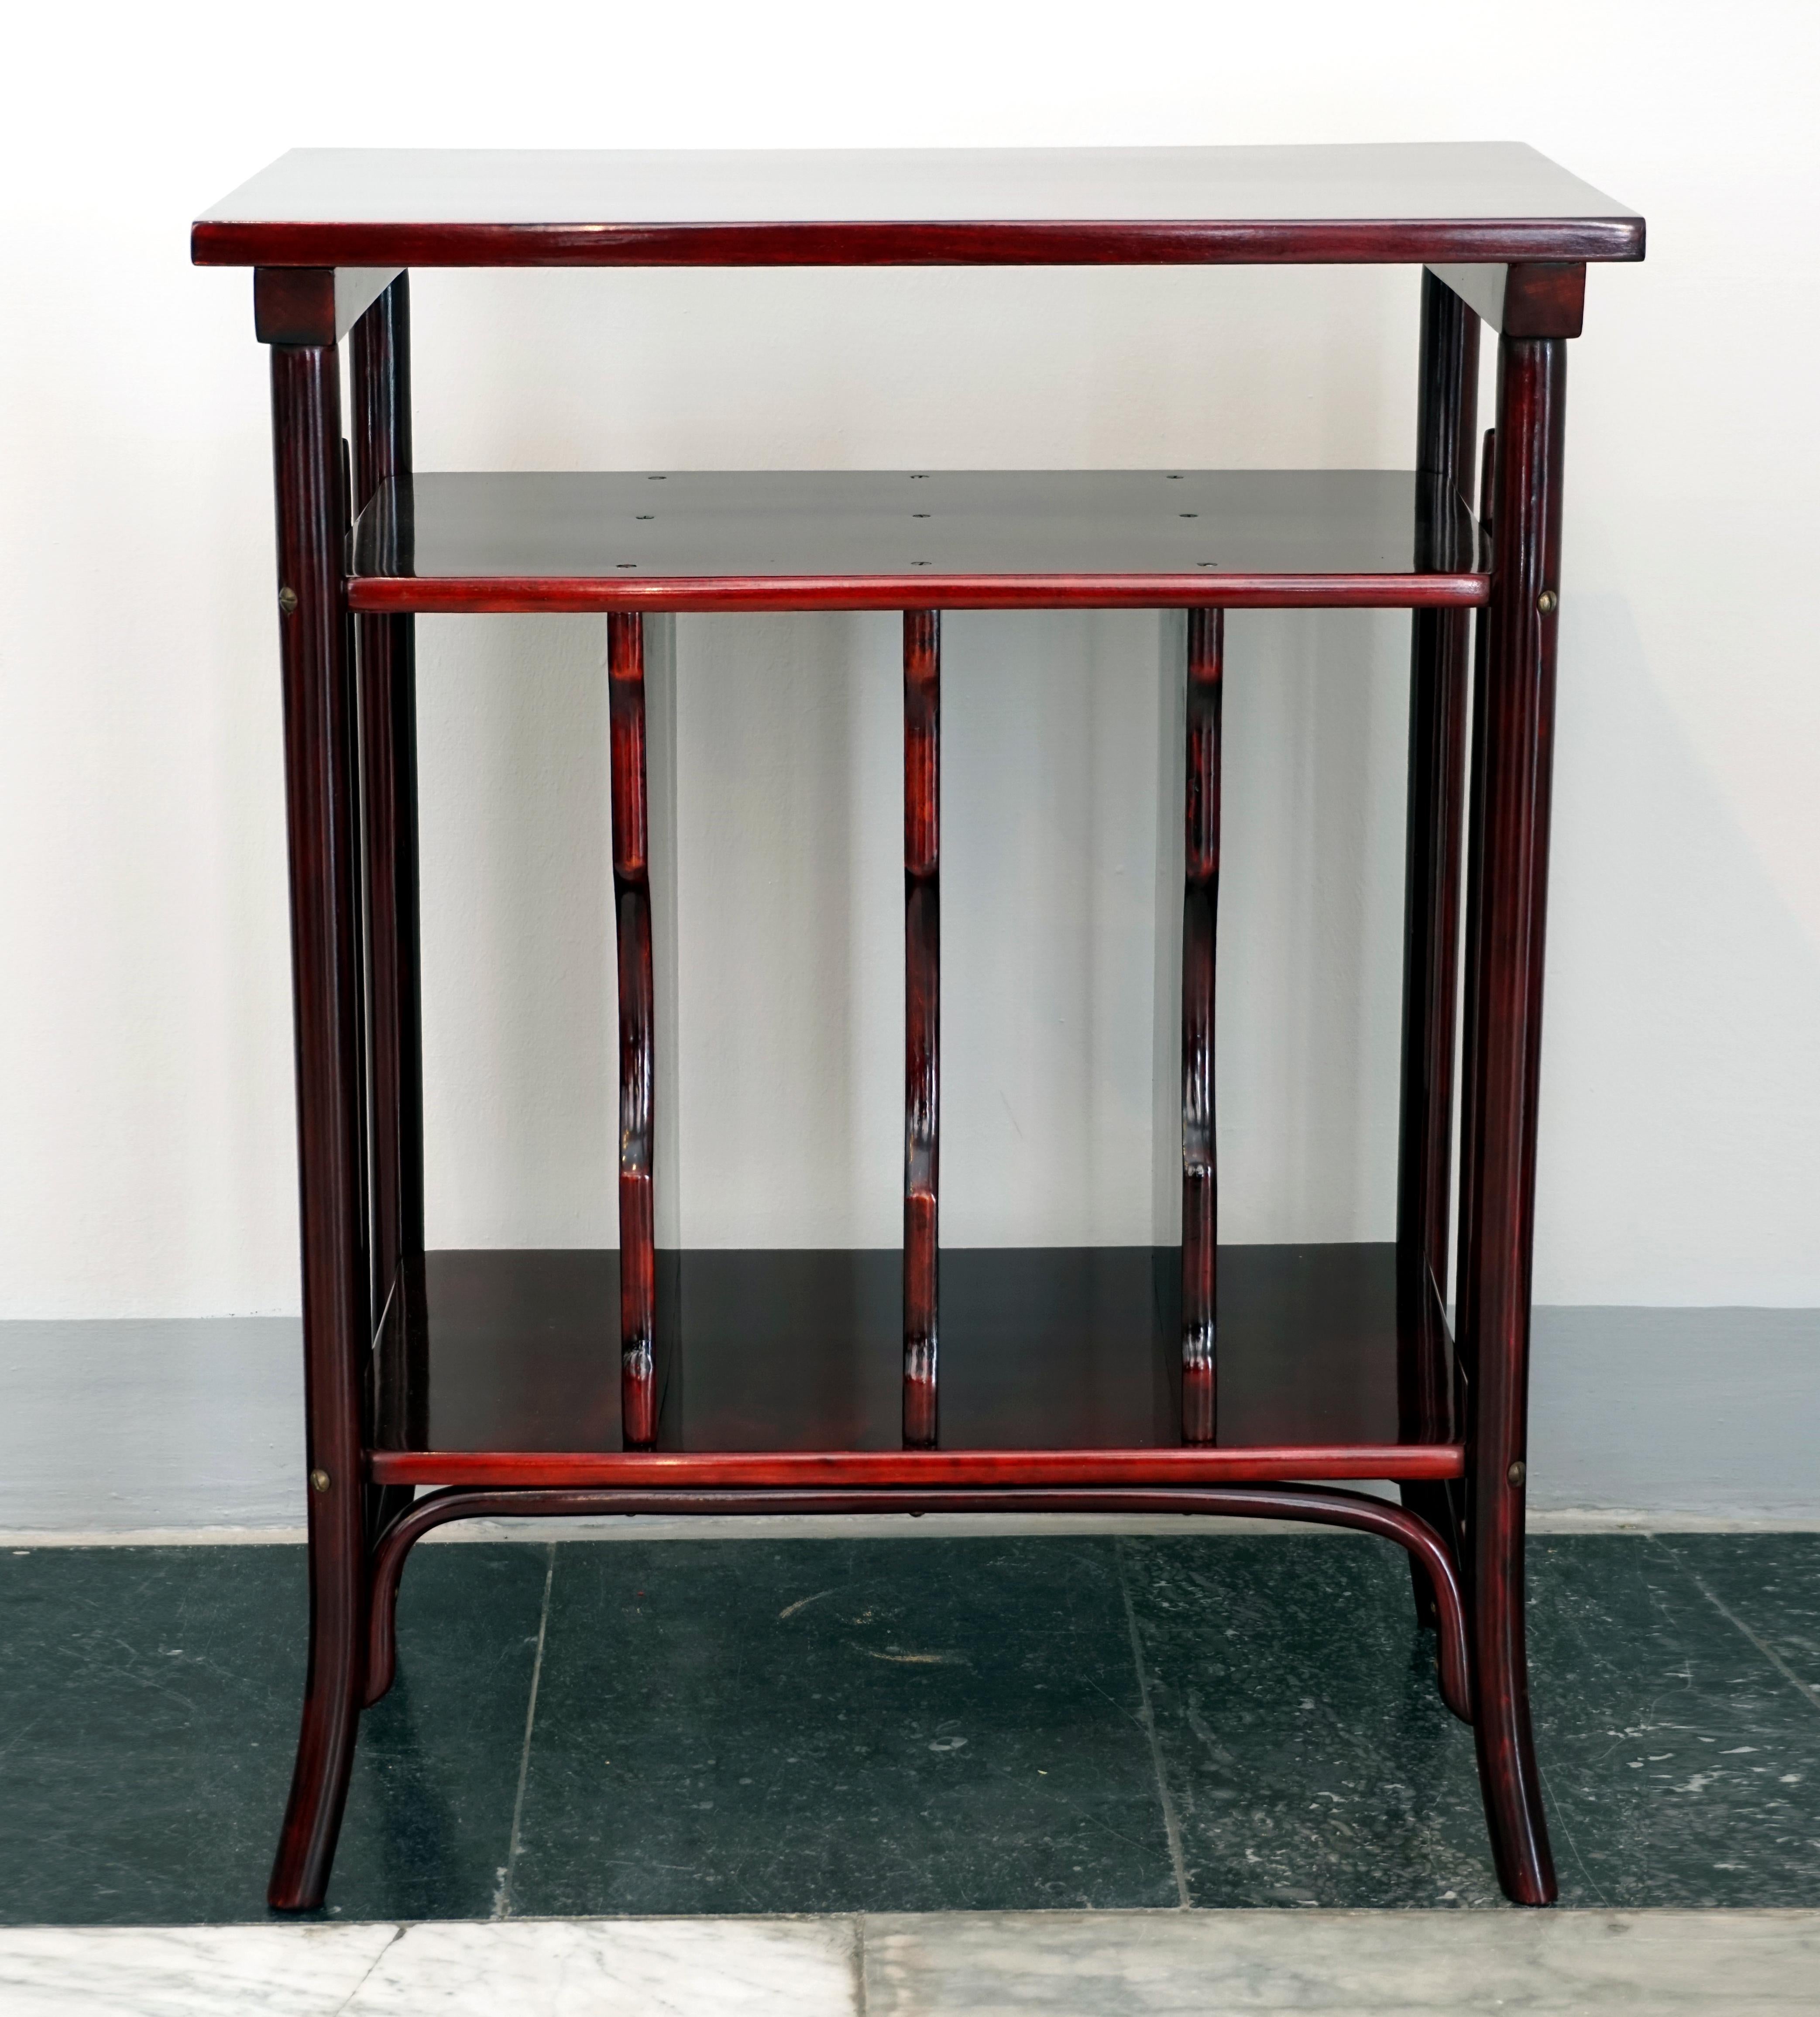 Early 20th Century Thonet Vienna Art Nouveau Music Table, Mahogany stained, Around 1900